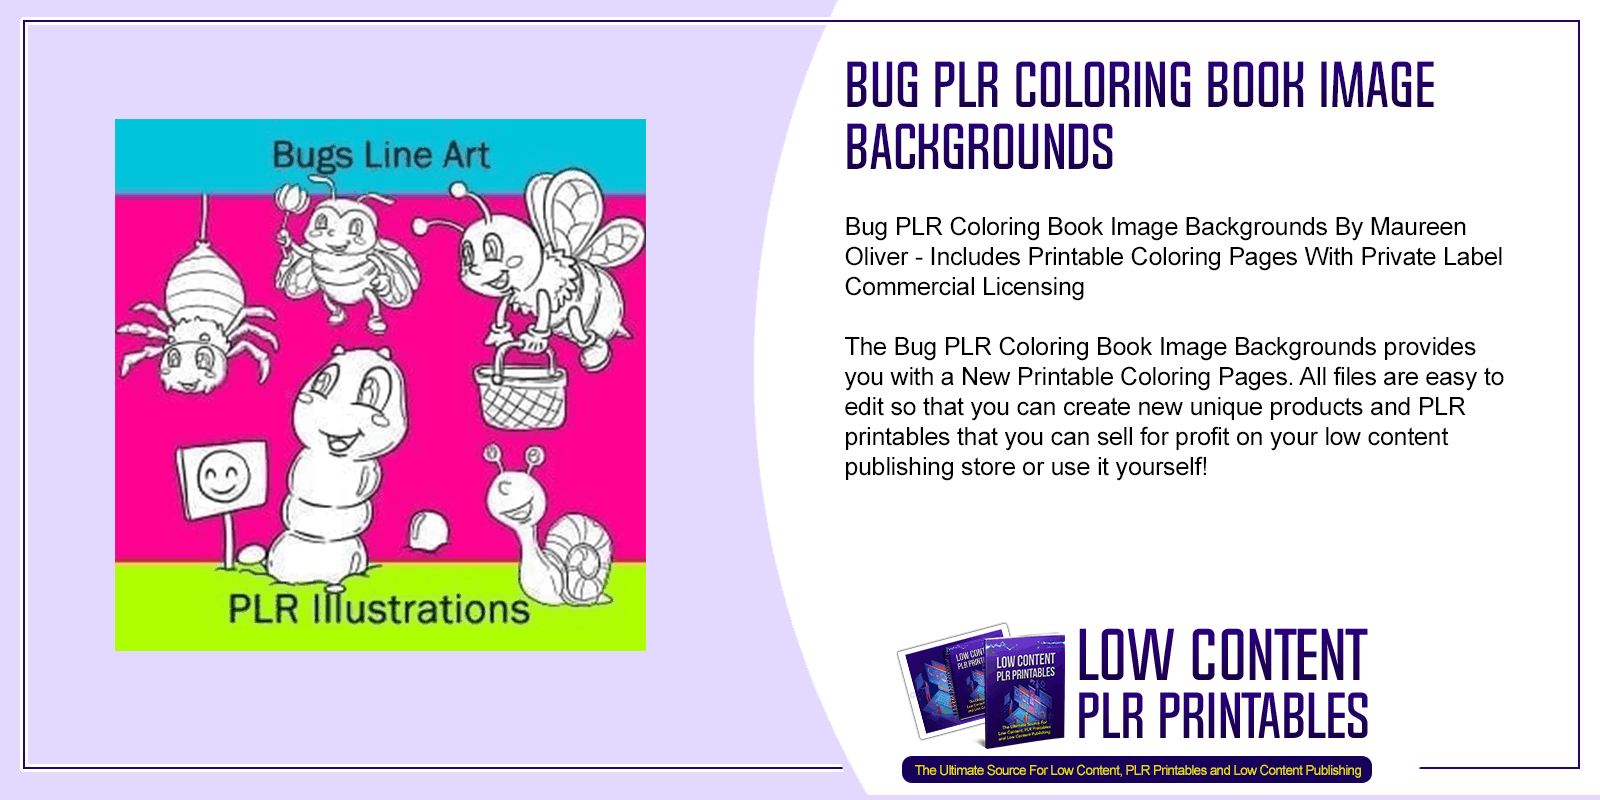 Bug PLR Coloring Book Image Backgrounds